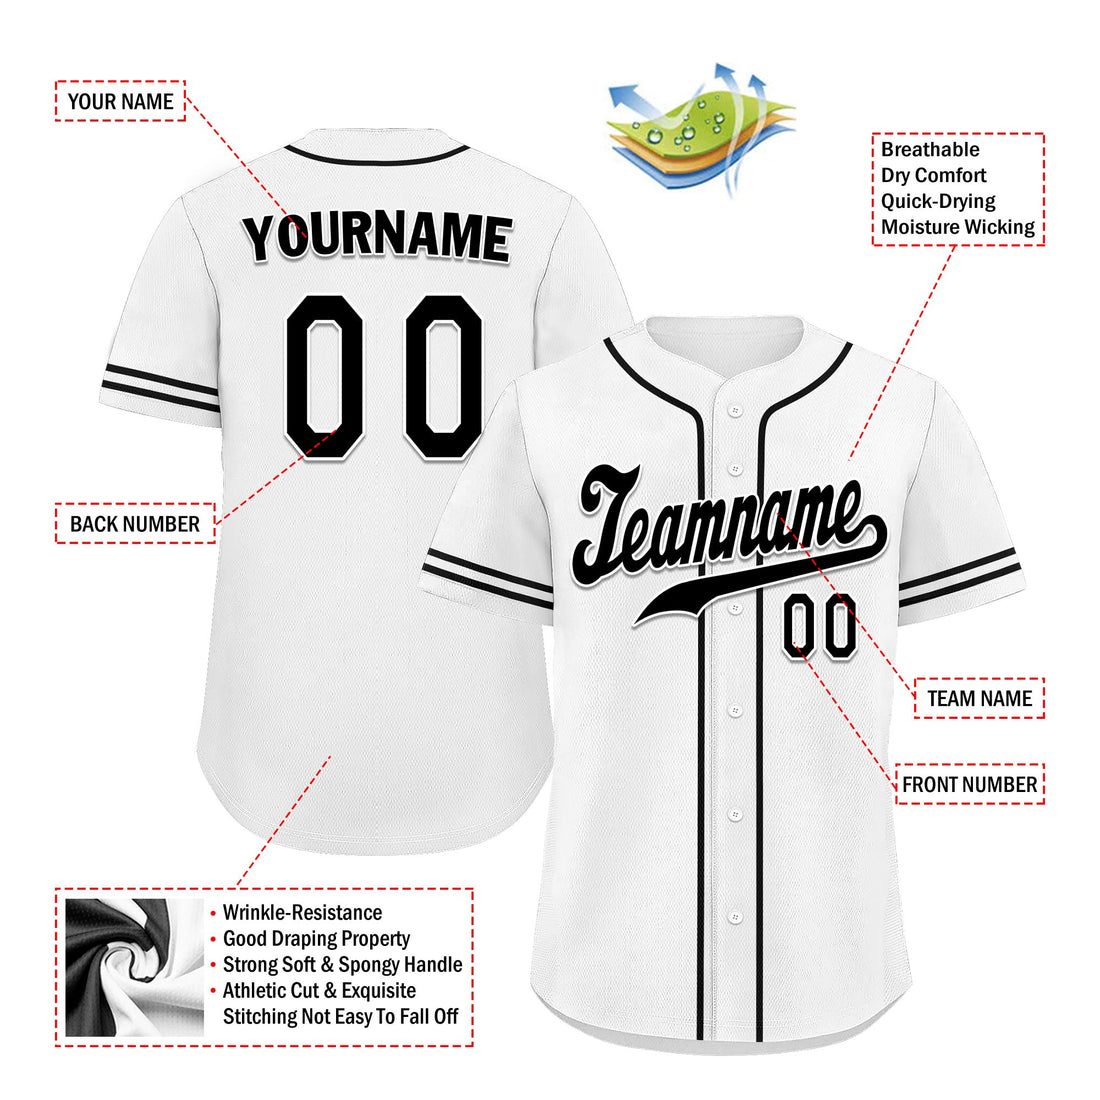 Custom White Classic Style Black Personalized Authentic Baseball Jersey UN002-bd0b00d8-bf